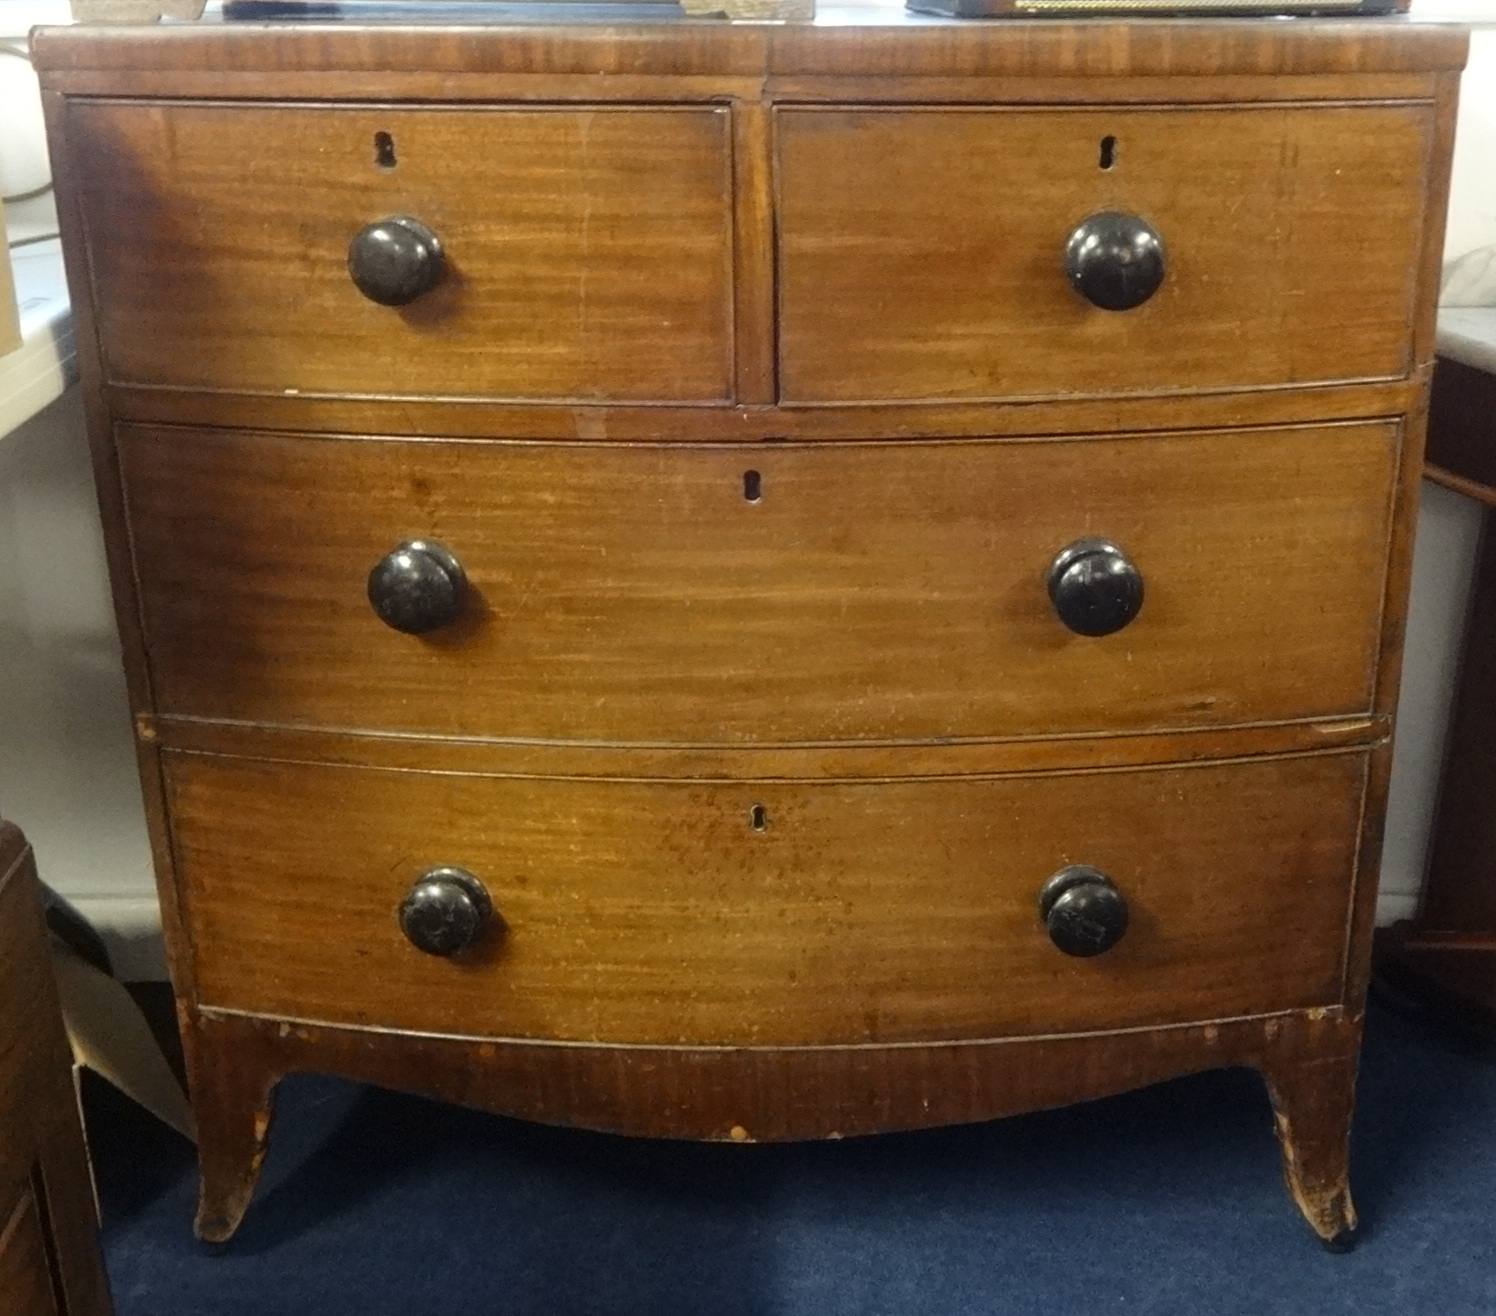 Early 19th century small mahogany bow fronted chest fitted with four drawers on splayed feet